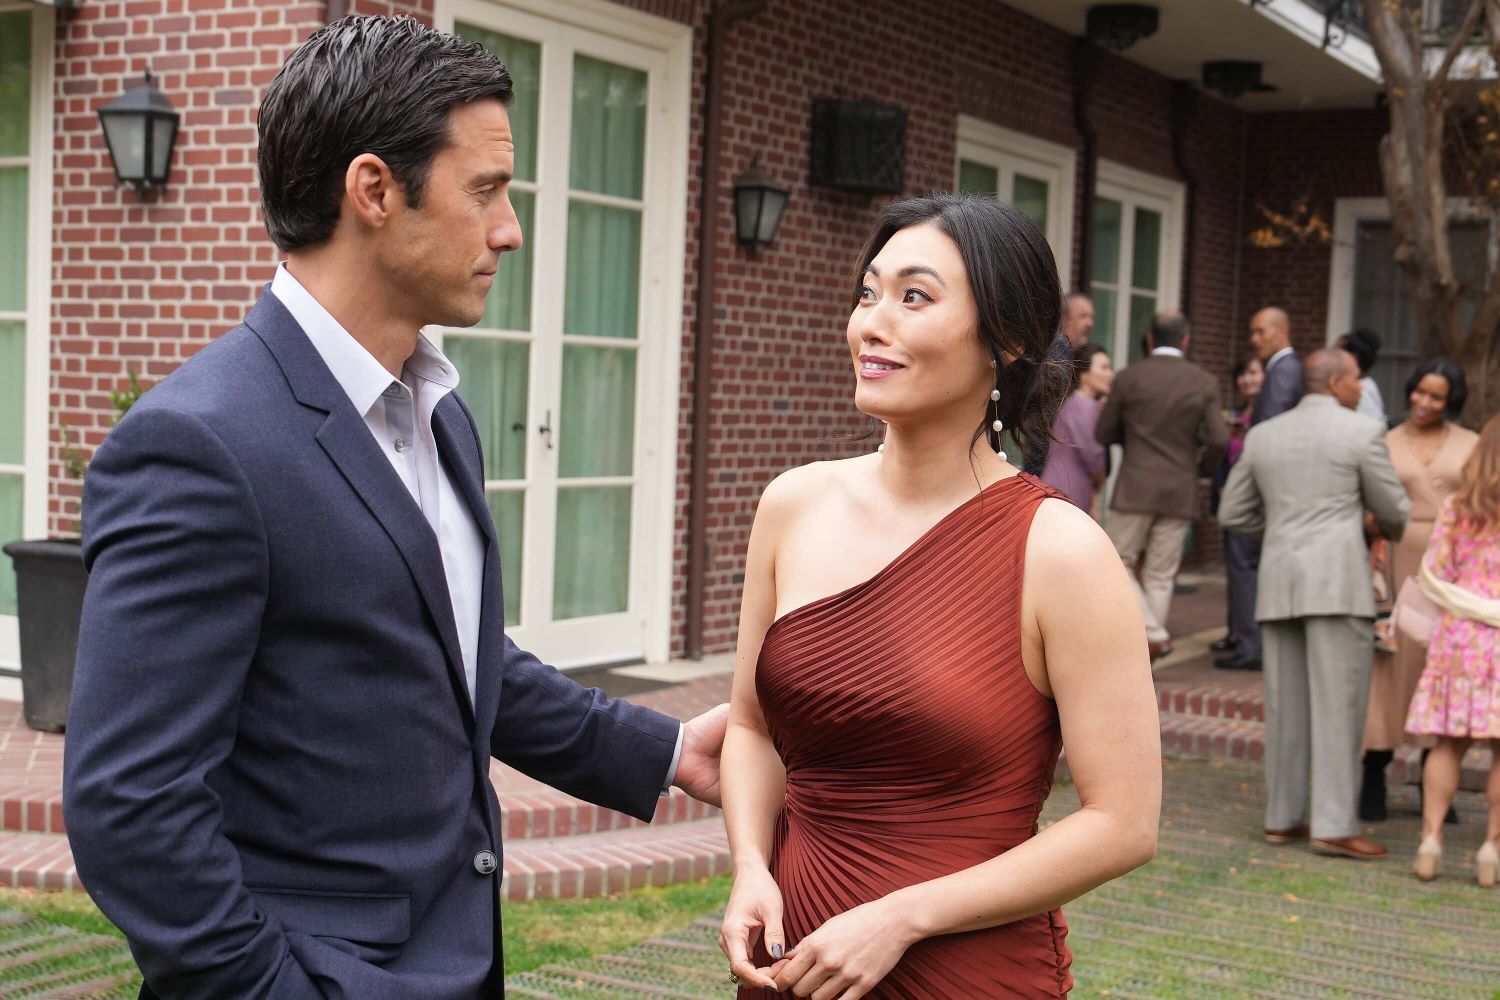 Milo Ventimiglia as Charlie and Catherine Haena Kim as Emma in 'The Company You Keep' Episode 4, which doesn't air tonight, March 12. Charlie wear a dark blue suit. Emma wears a dark red one-shoulder dress.